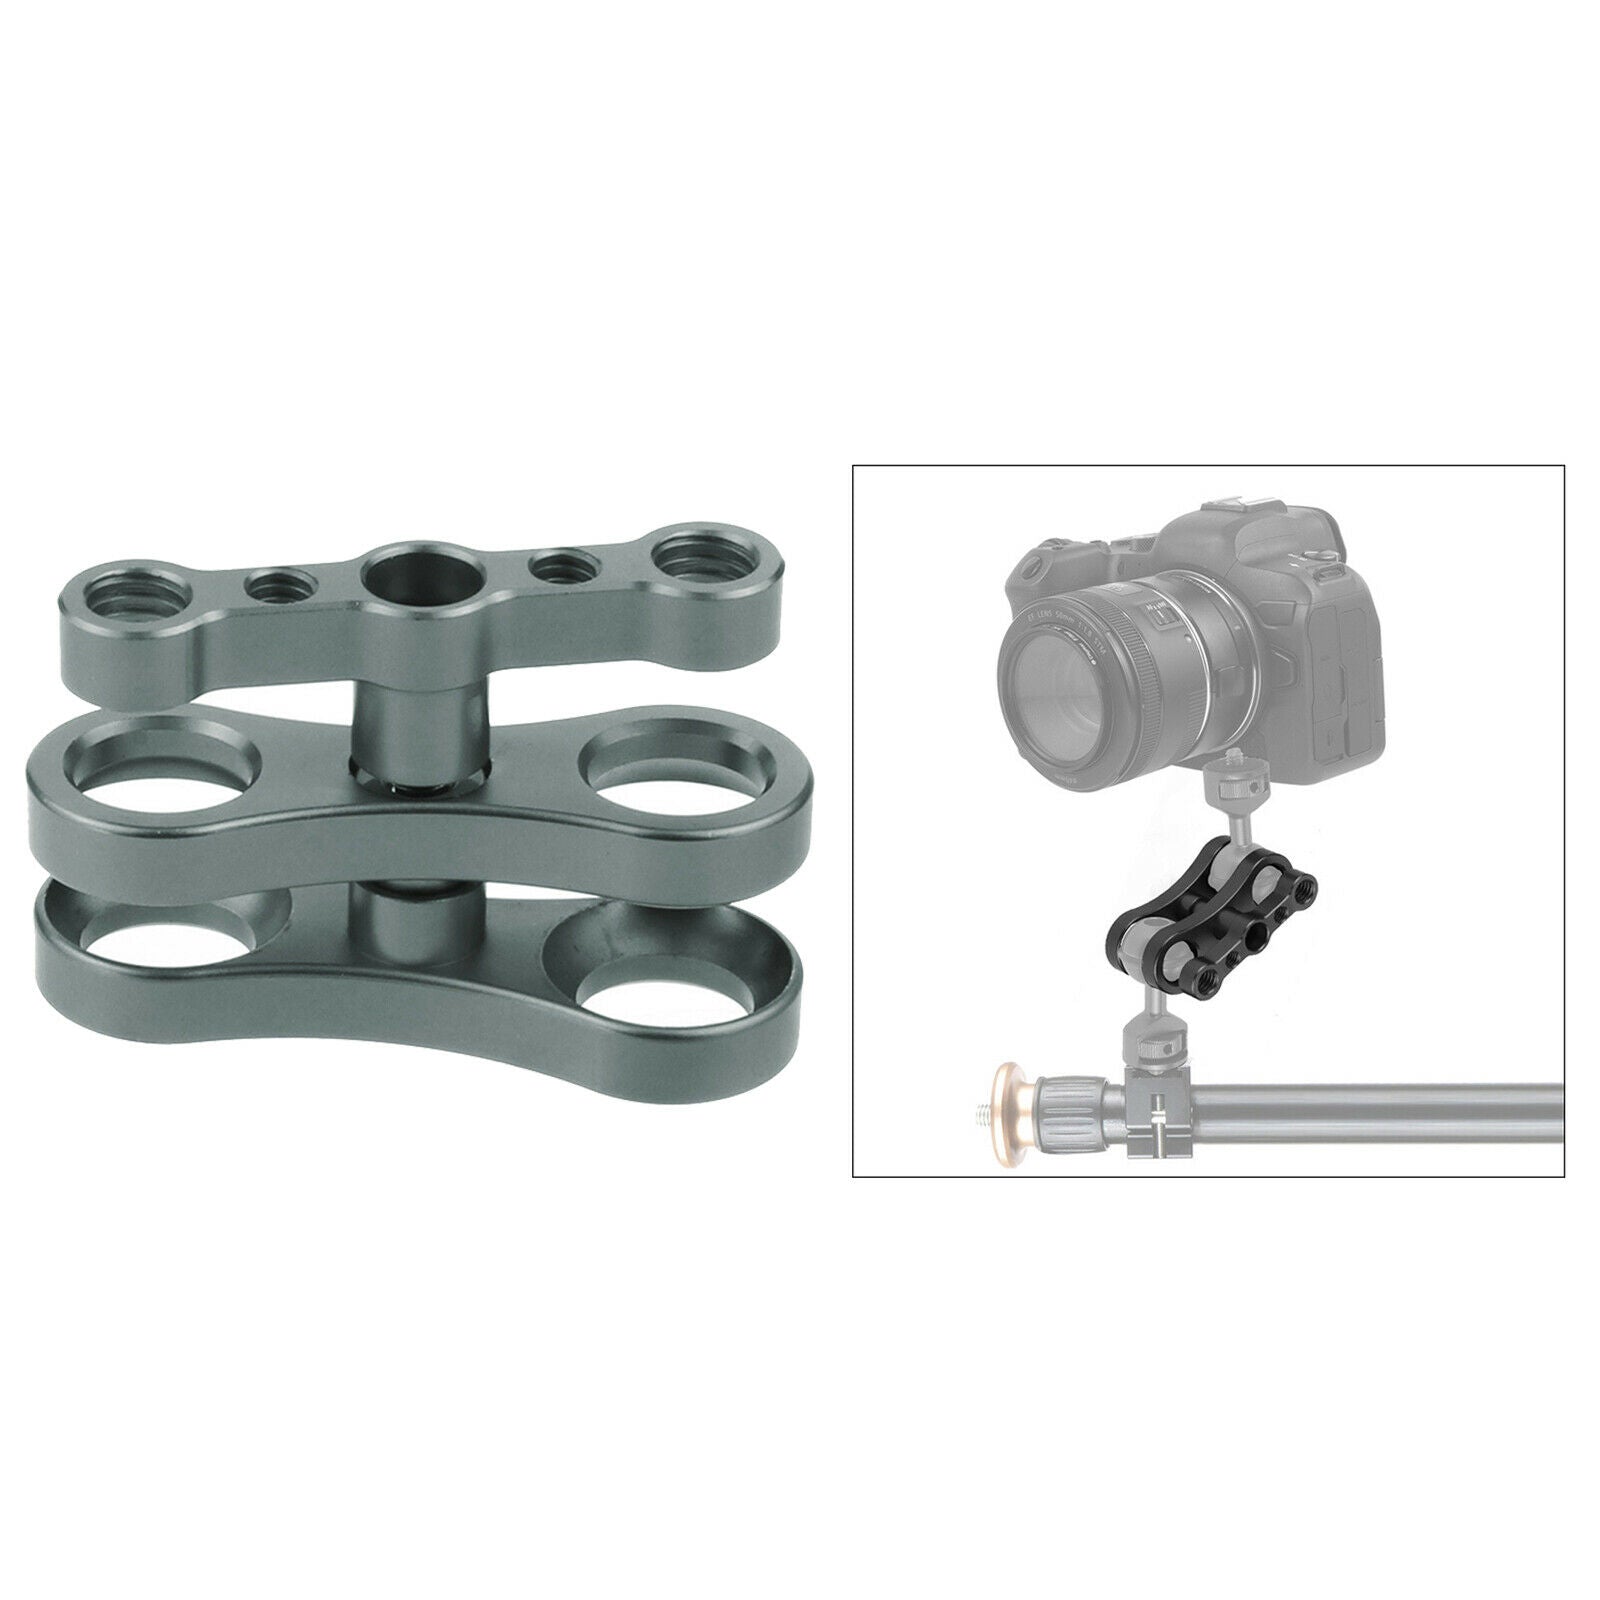 Aluminum Standard 1" Ball Clamp for Underwater Diving Light Arm System gray